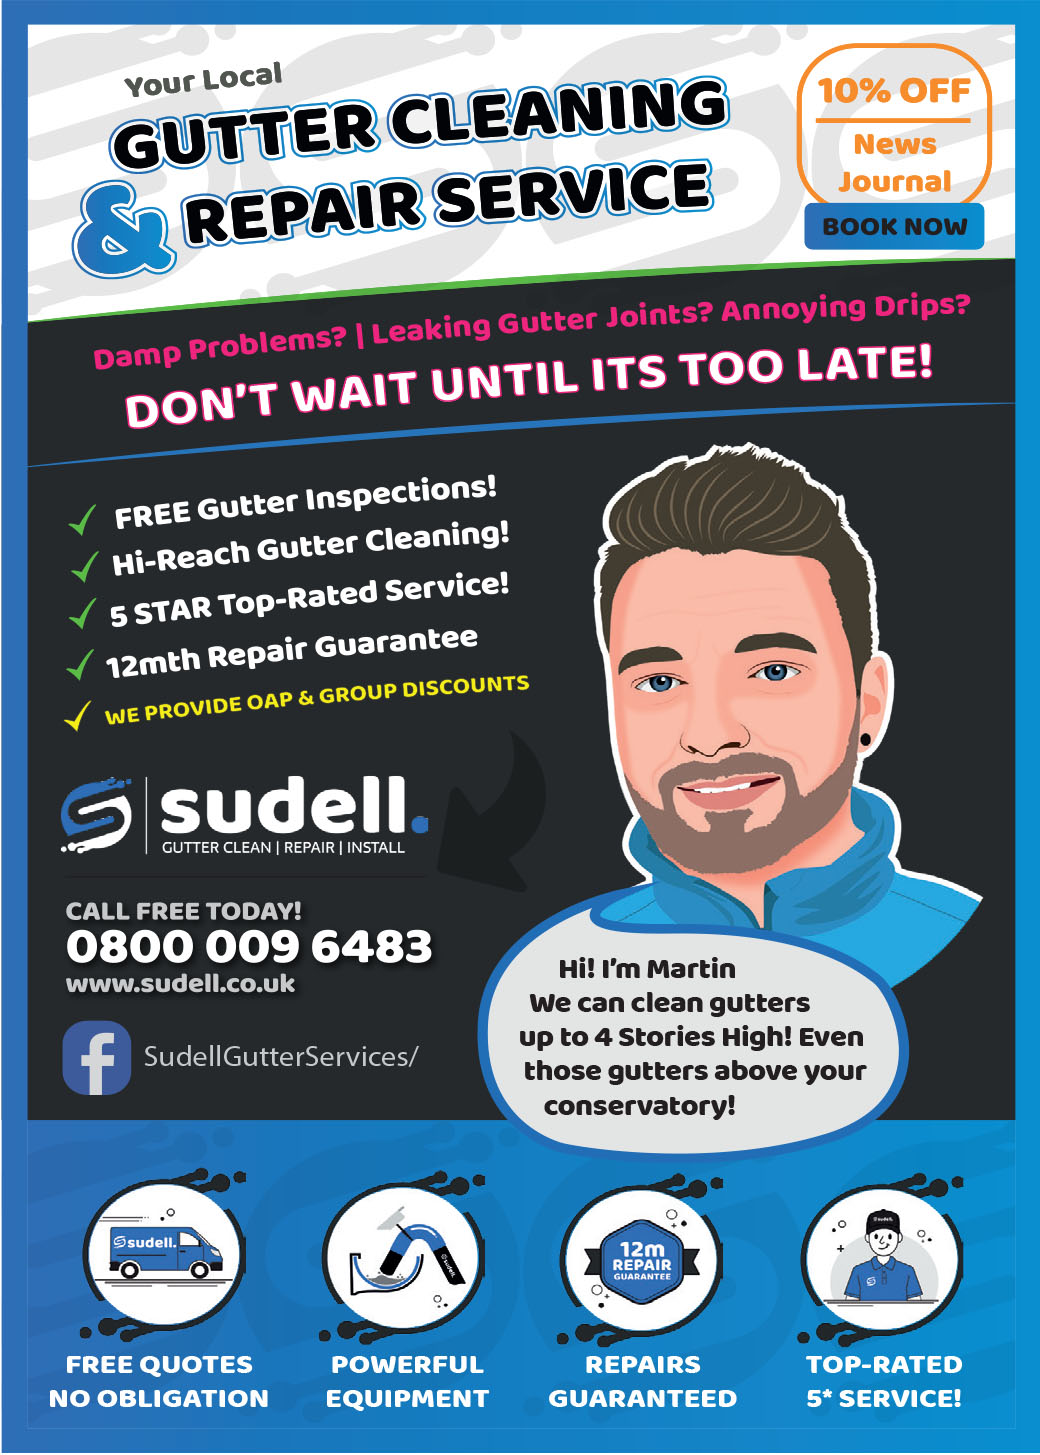 Sudell Gutter Services